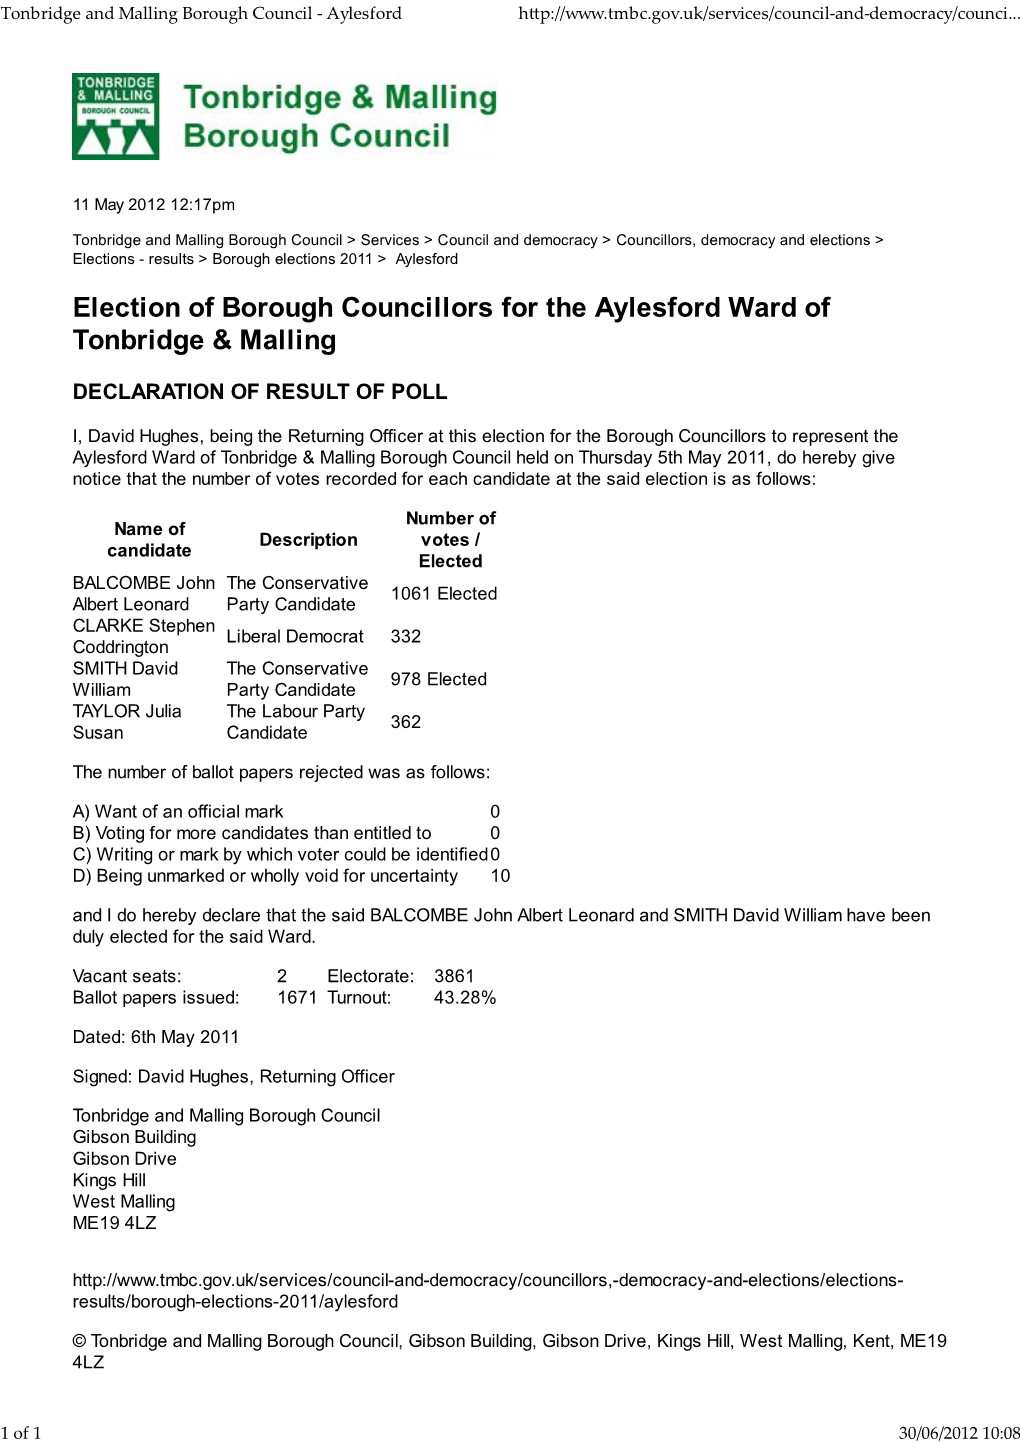 Election of Borough Councillors for the Aylesford Ward of Tonbridge & Malling